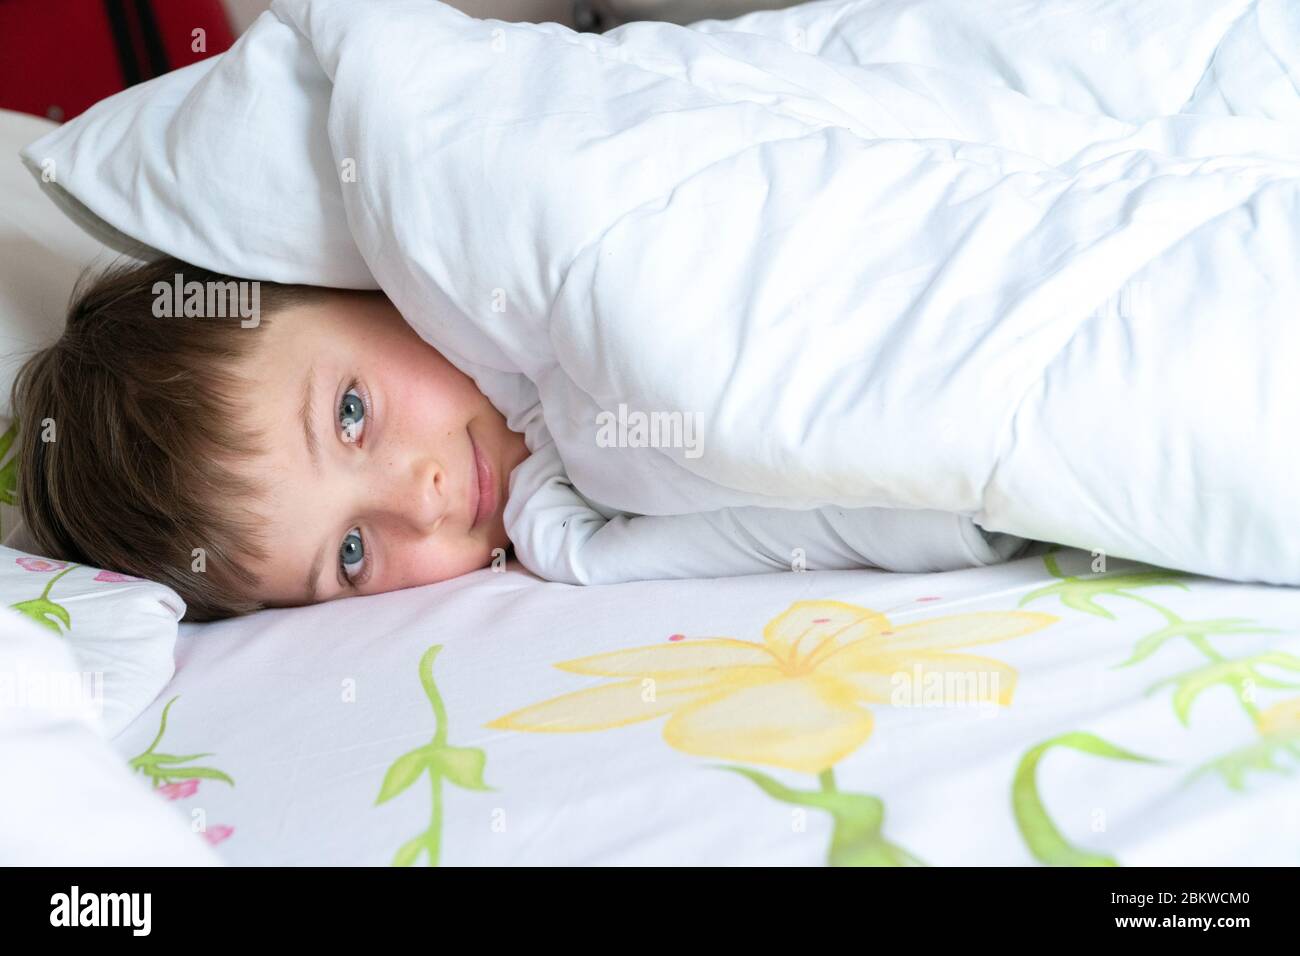 Top view of little boy in bed covering his face with white blanket or coverlet. Sleeping boy. Stock Photo